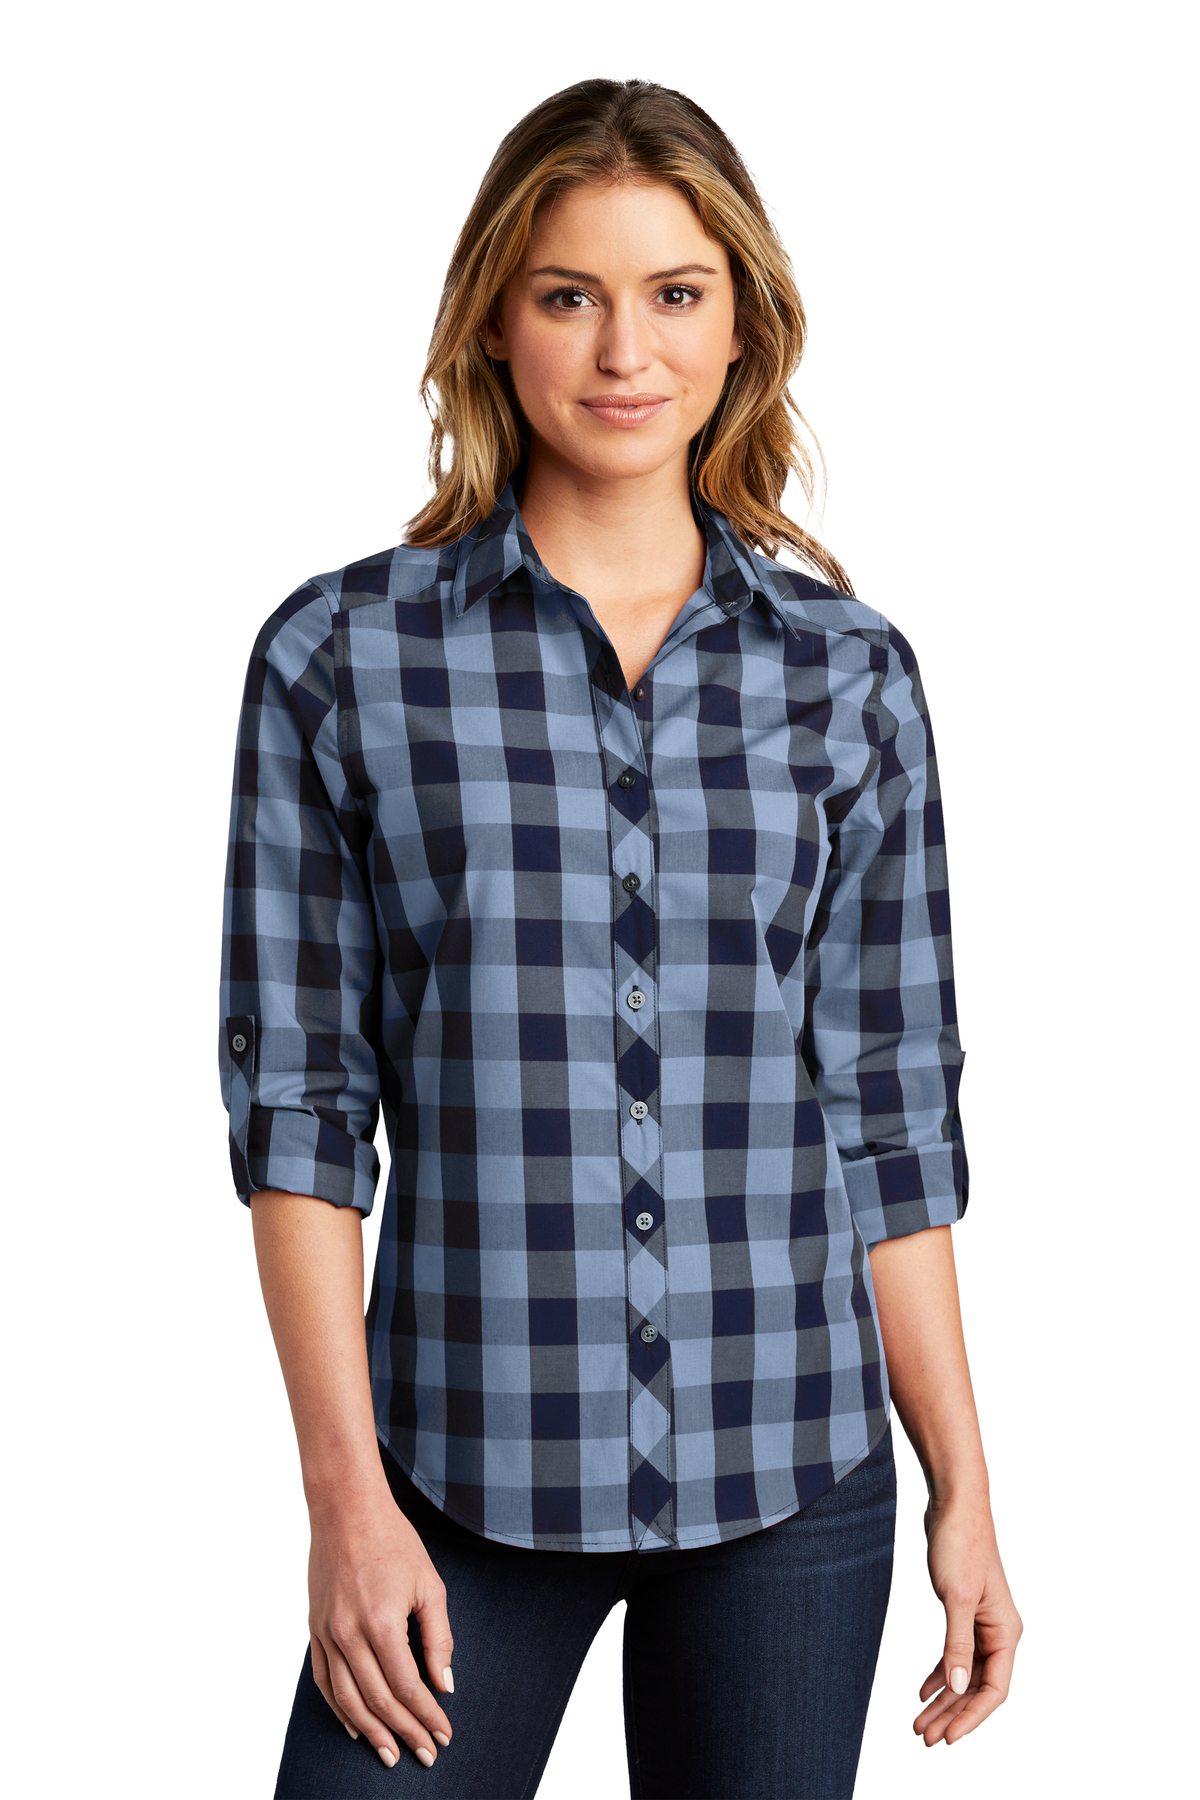 Port Authority Embroidered Women's Everyday Plaid Shirt - Queensboro